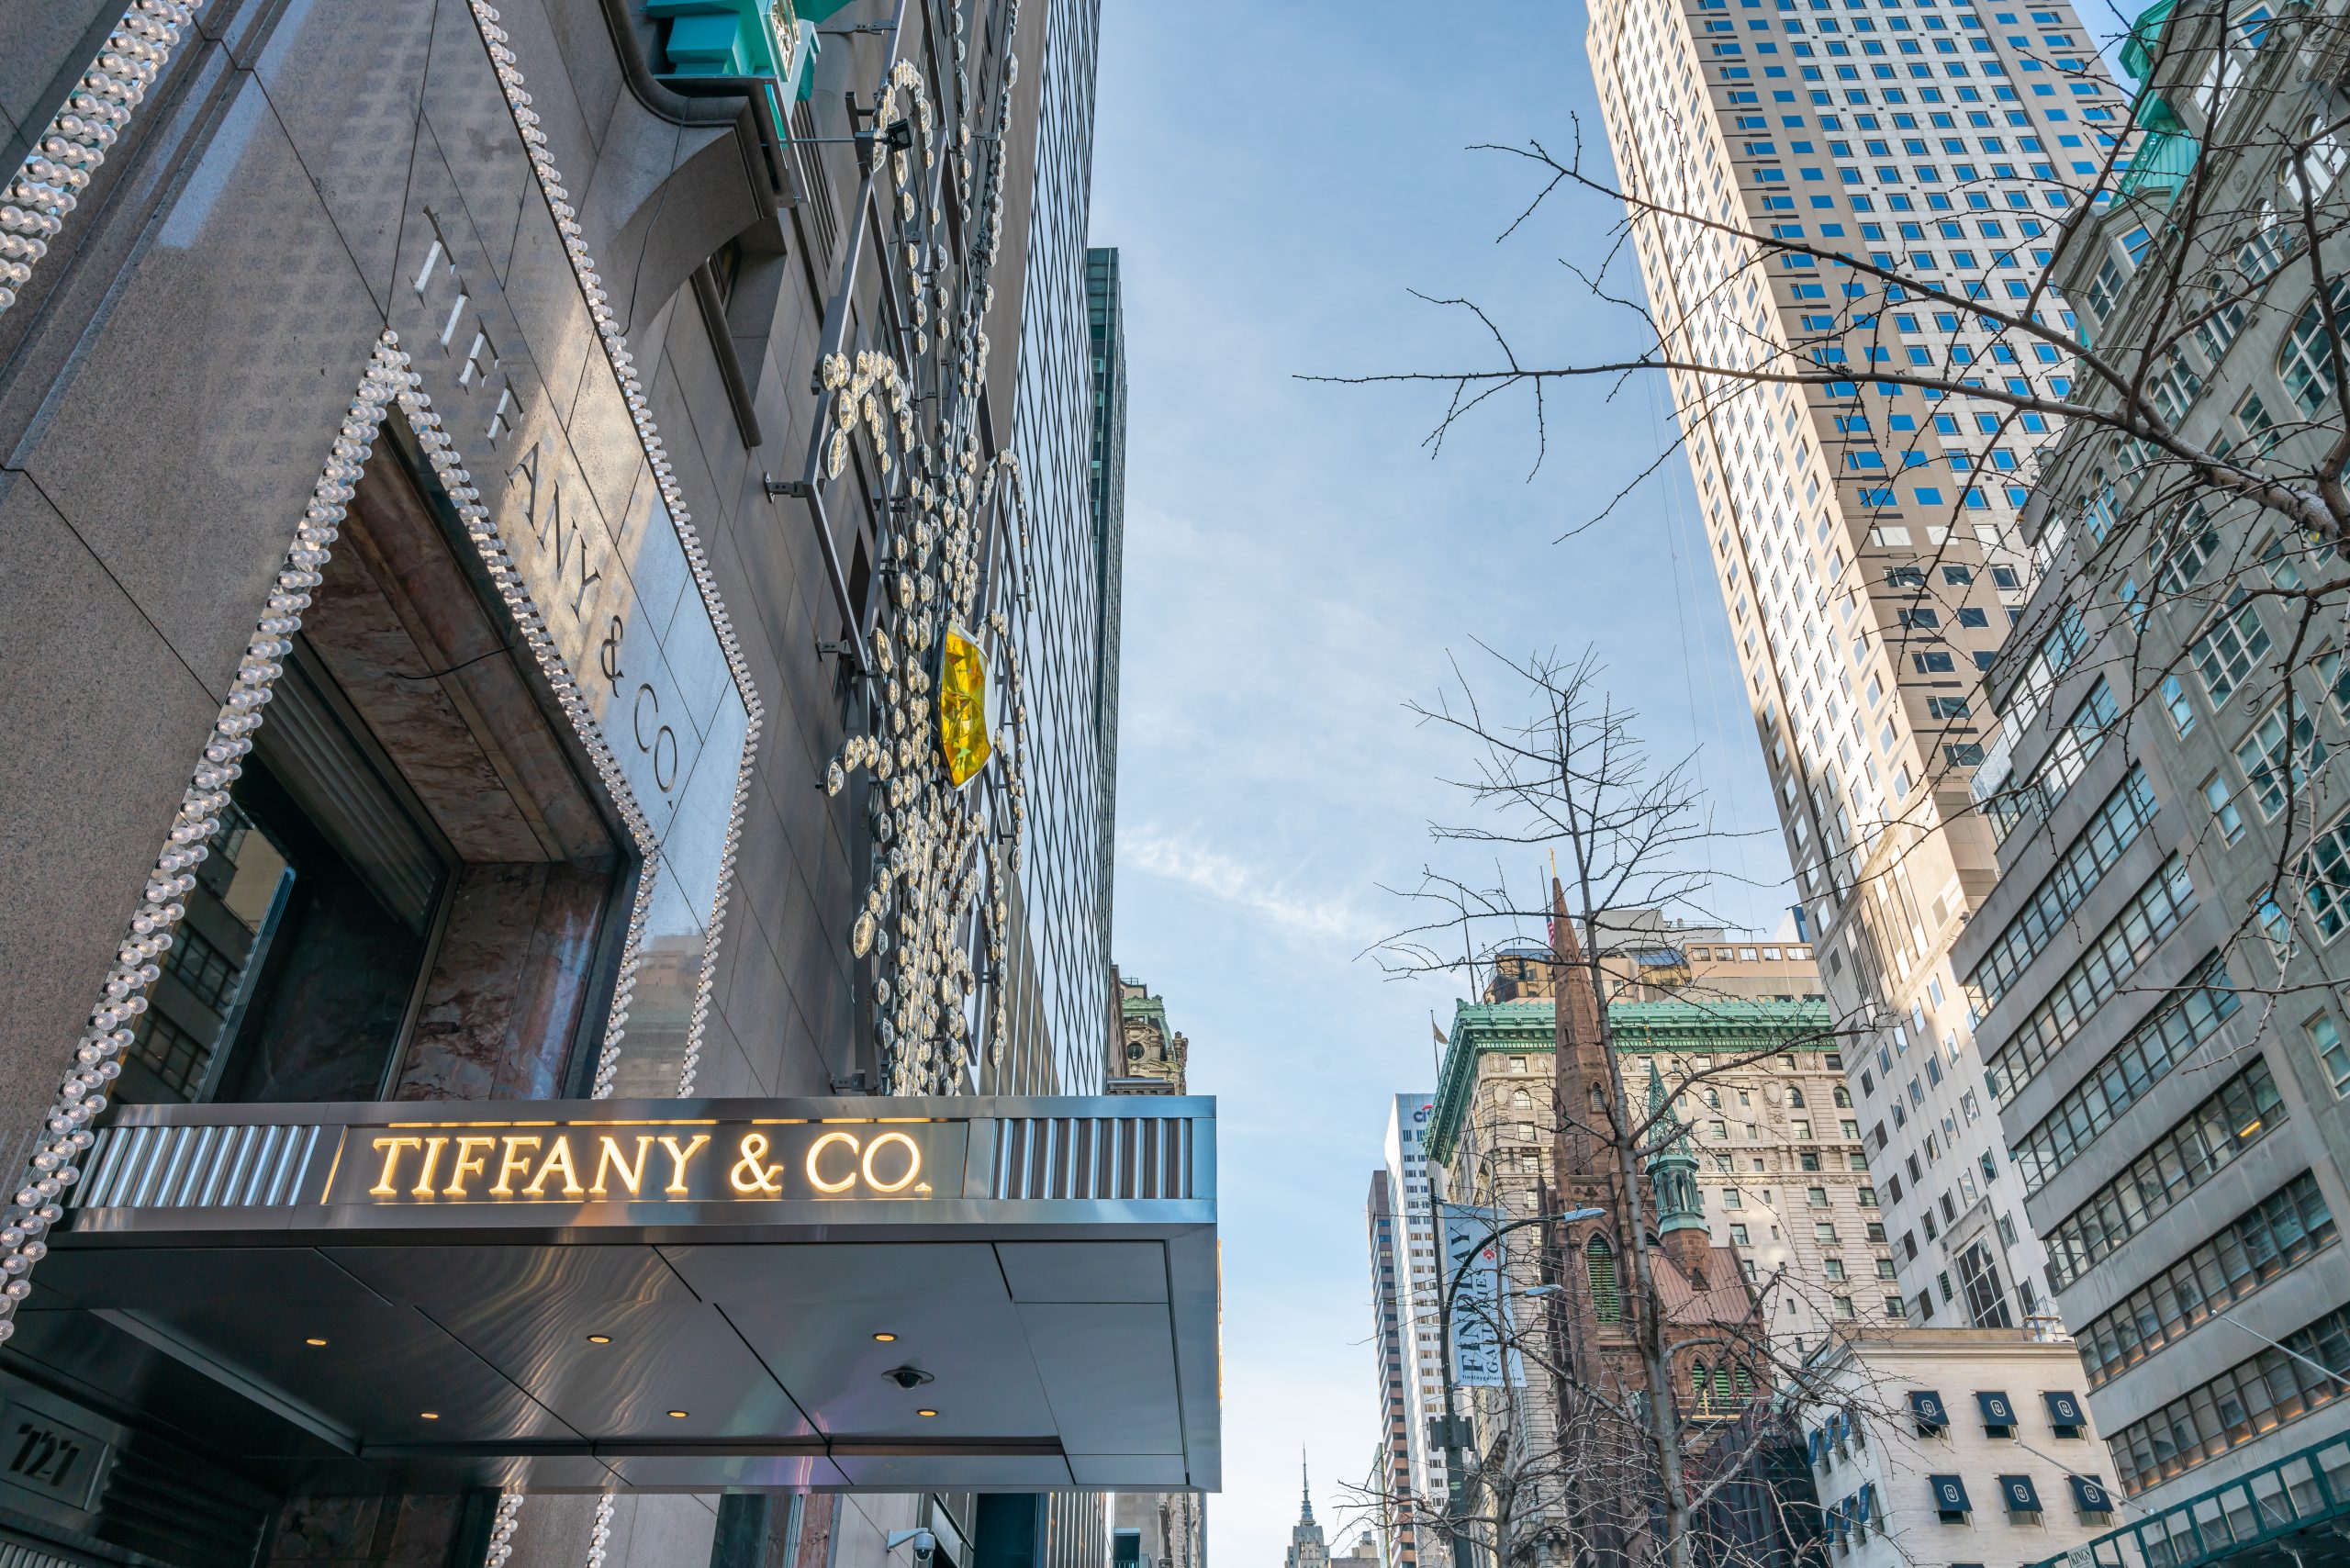 LVMH countersues Tiffany & Co. after acquisition breakdown